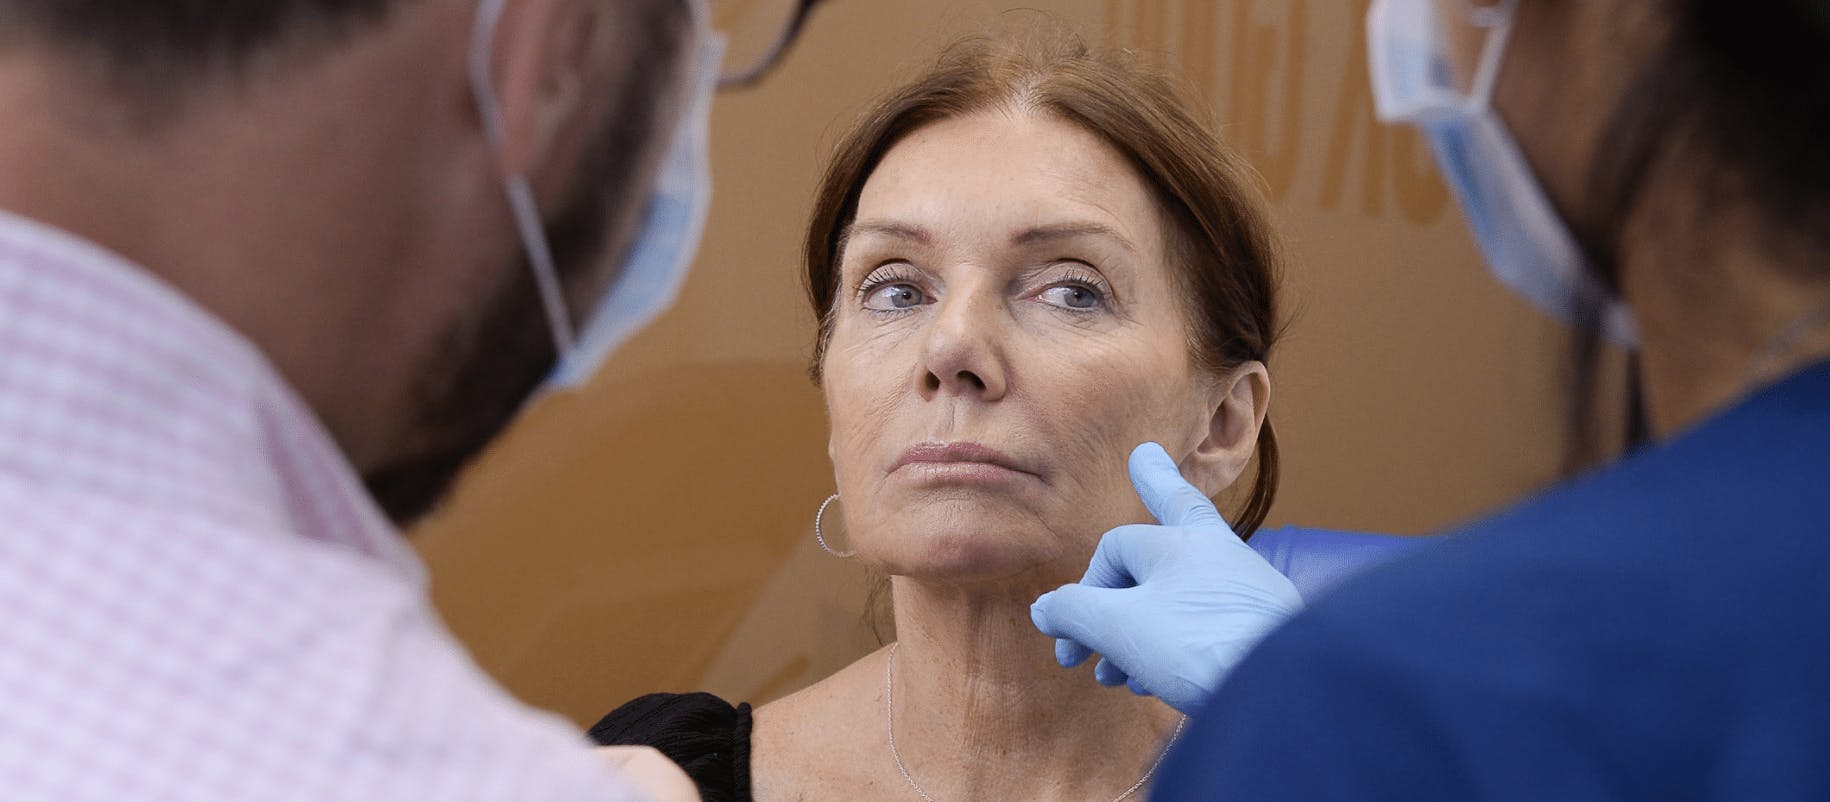 Learn How to Treat Mature Filler Patients